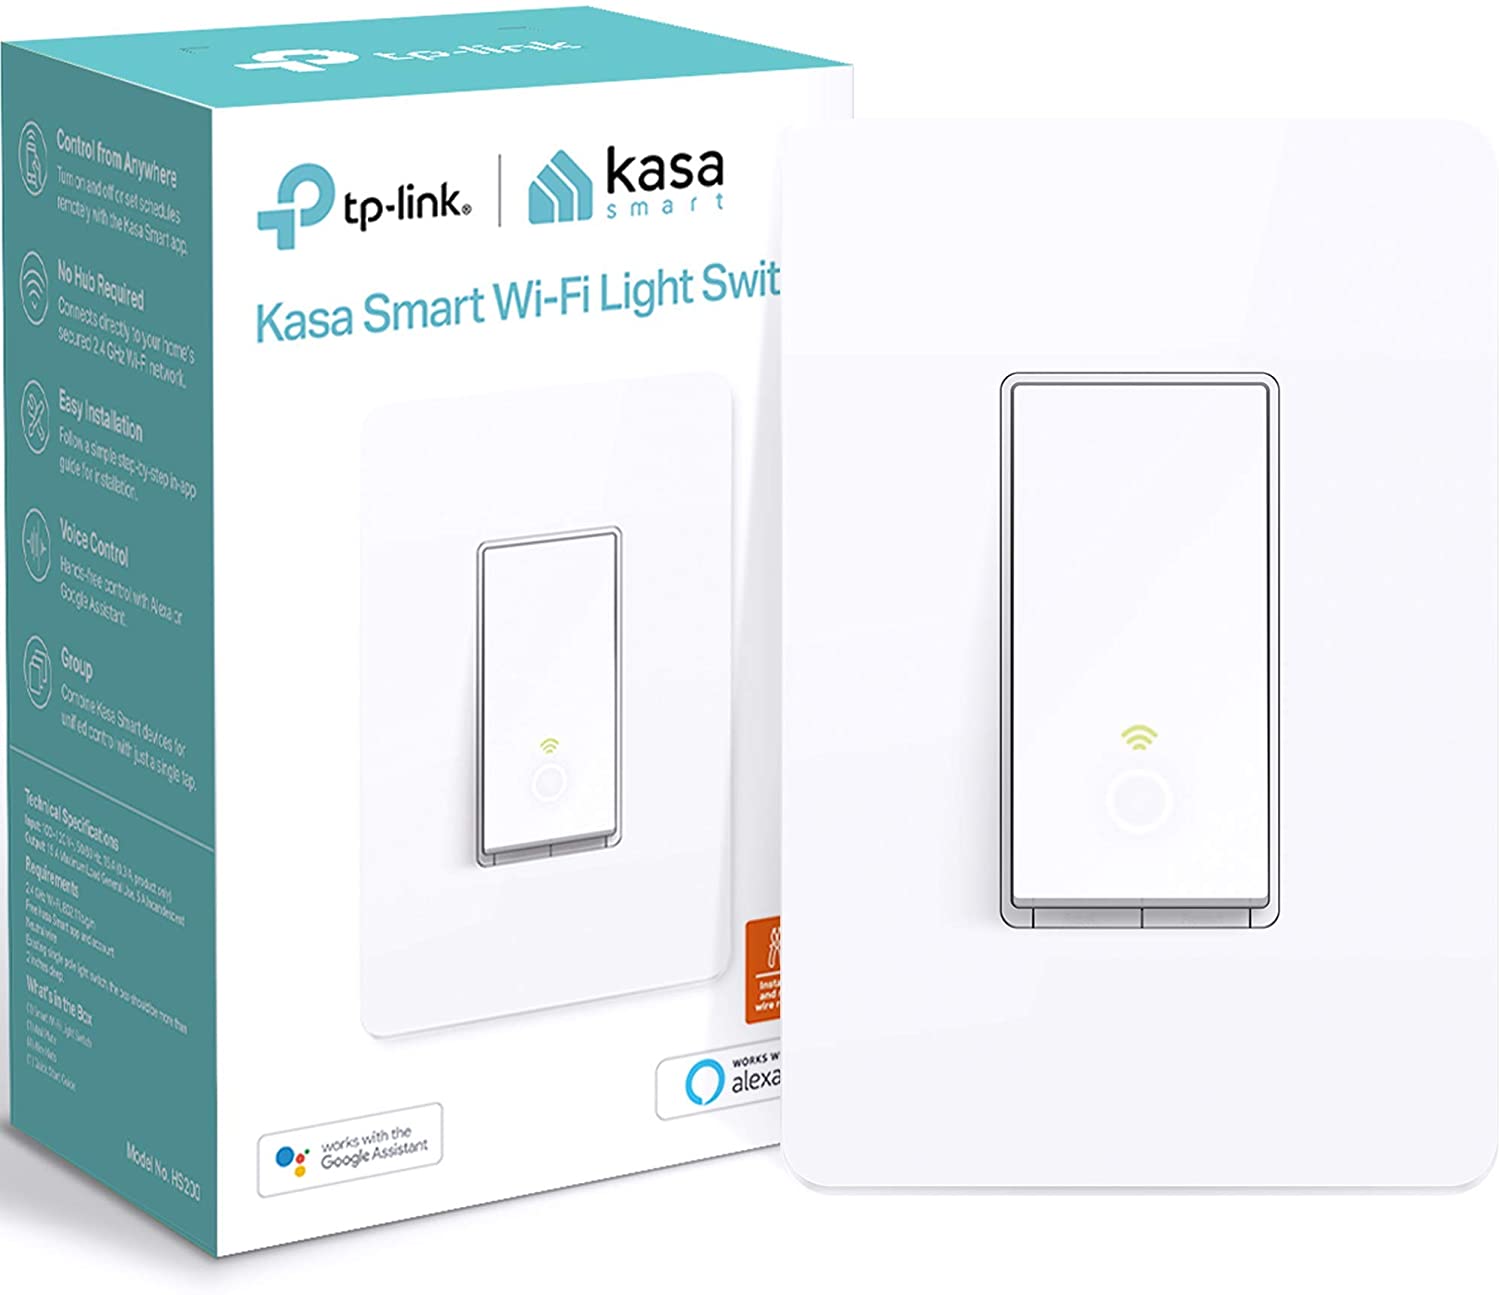 Kasa Smart HS200 Light Switch by TP-Link for 14.99 at Amazon & Best Buy